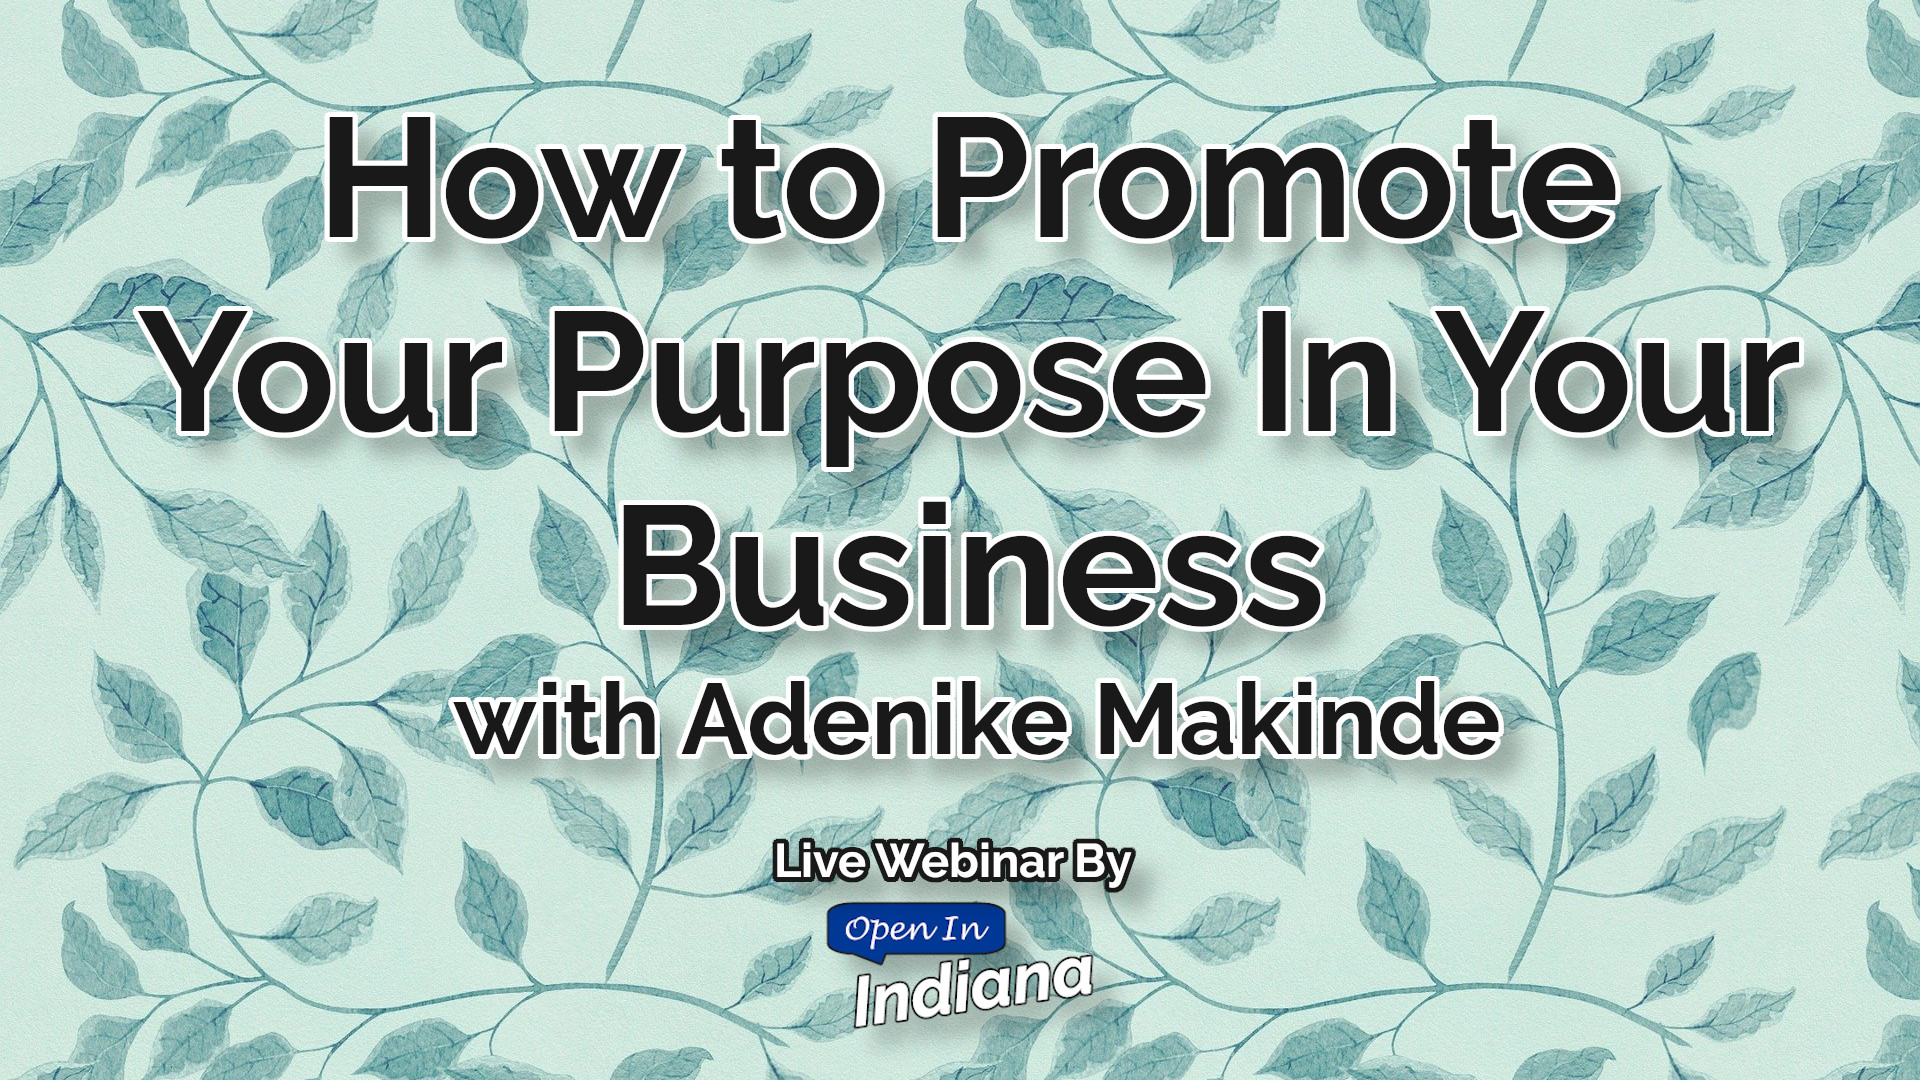 How to Promote Your Purpose in Your Business with Adenike Makinde, Live Webinar by Open In Indiana/INSPIREsmall.biz. The background is a light teal, with darker teal colored viney leaves.